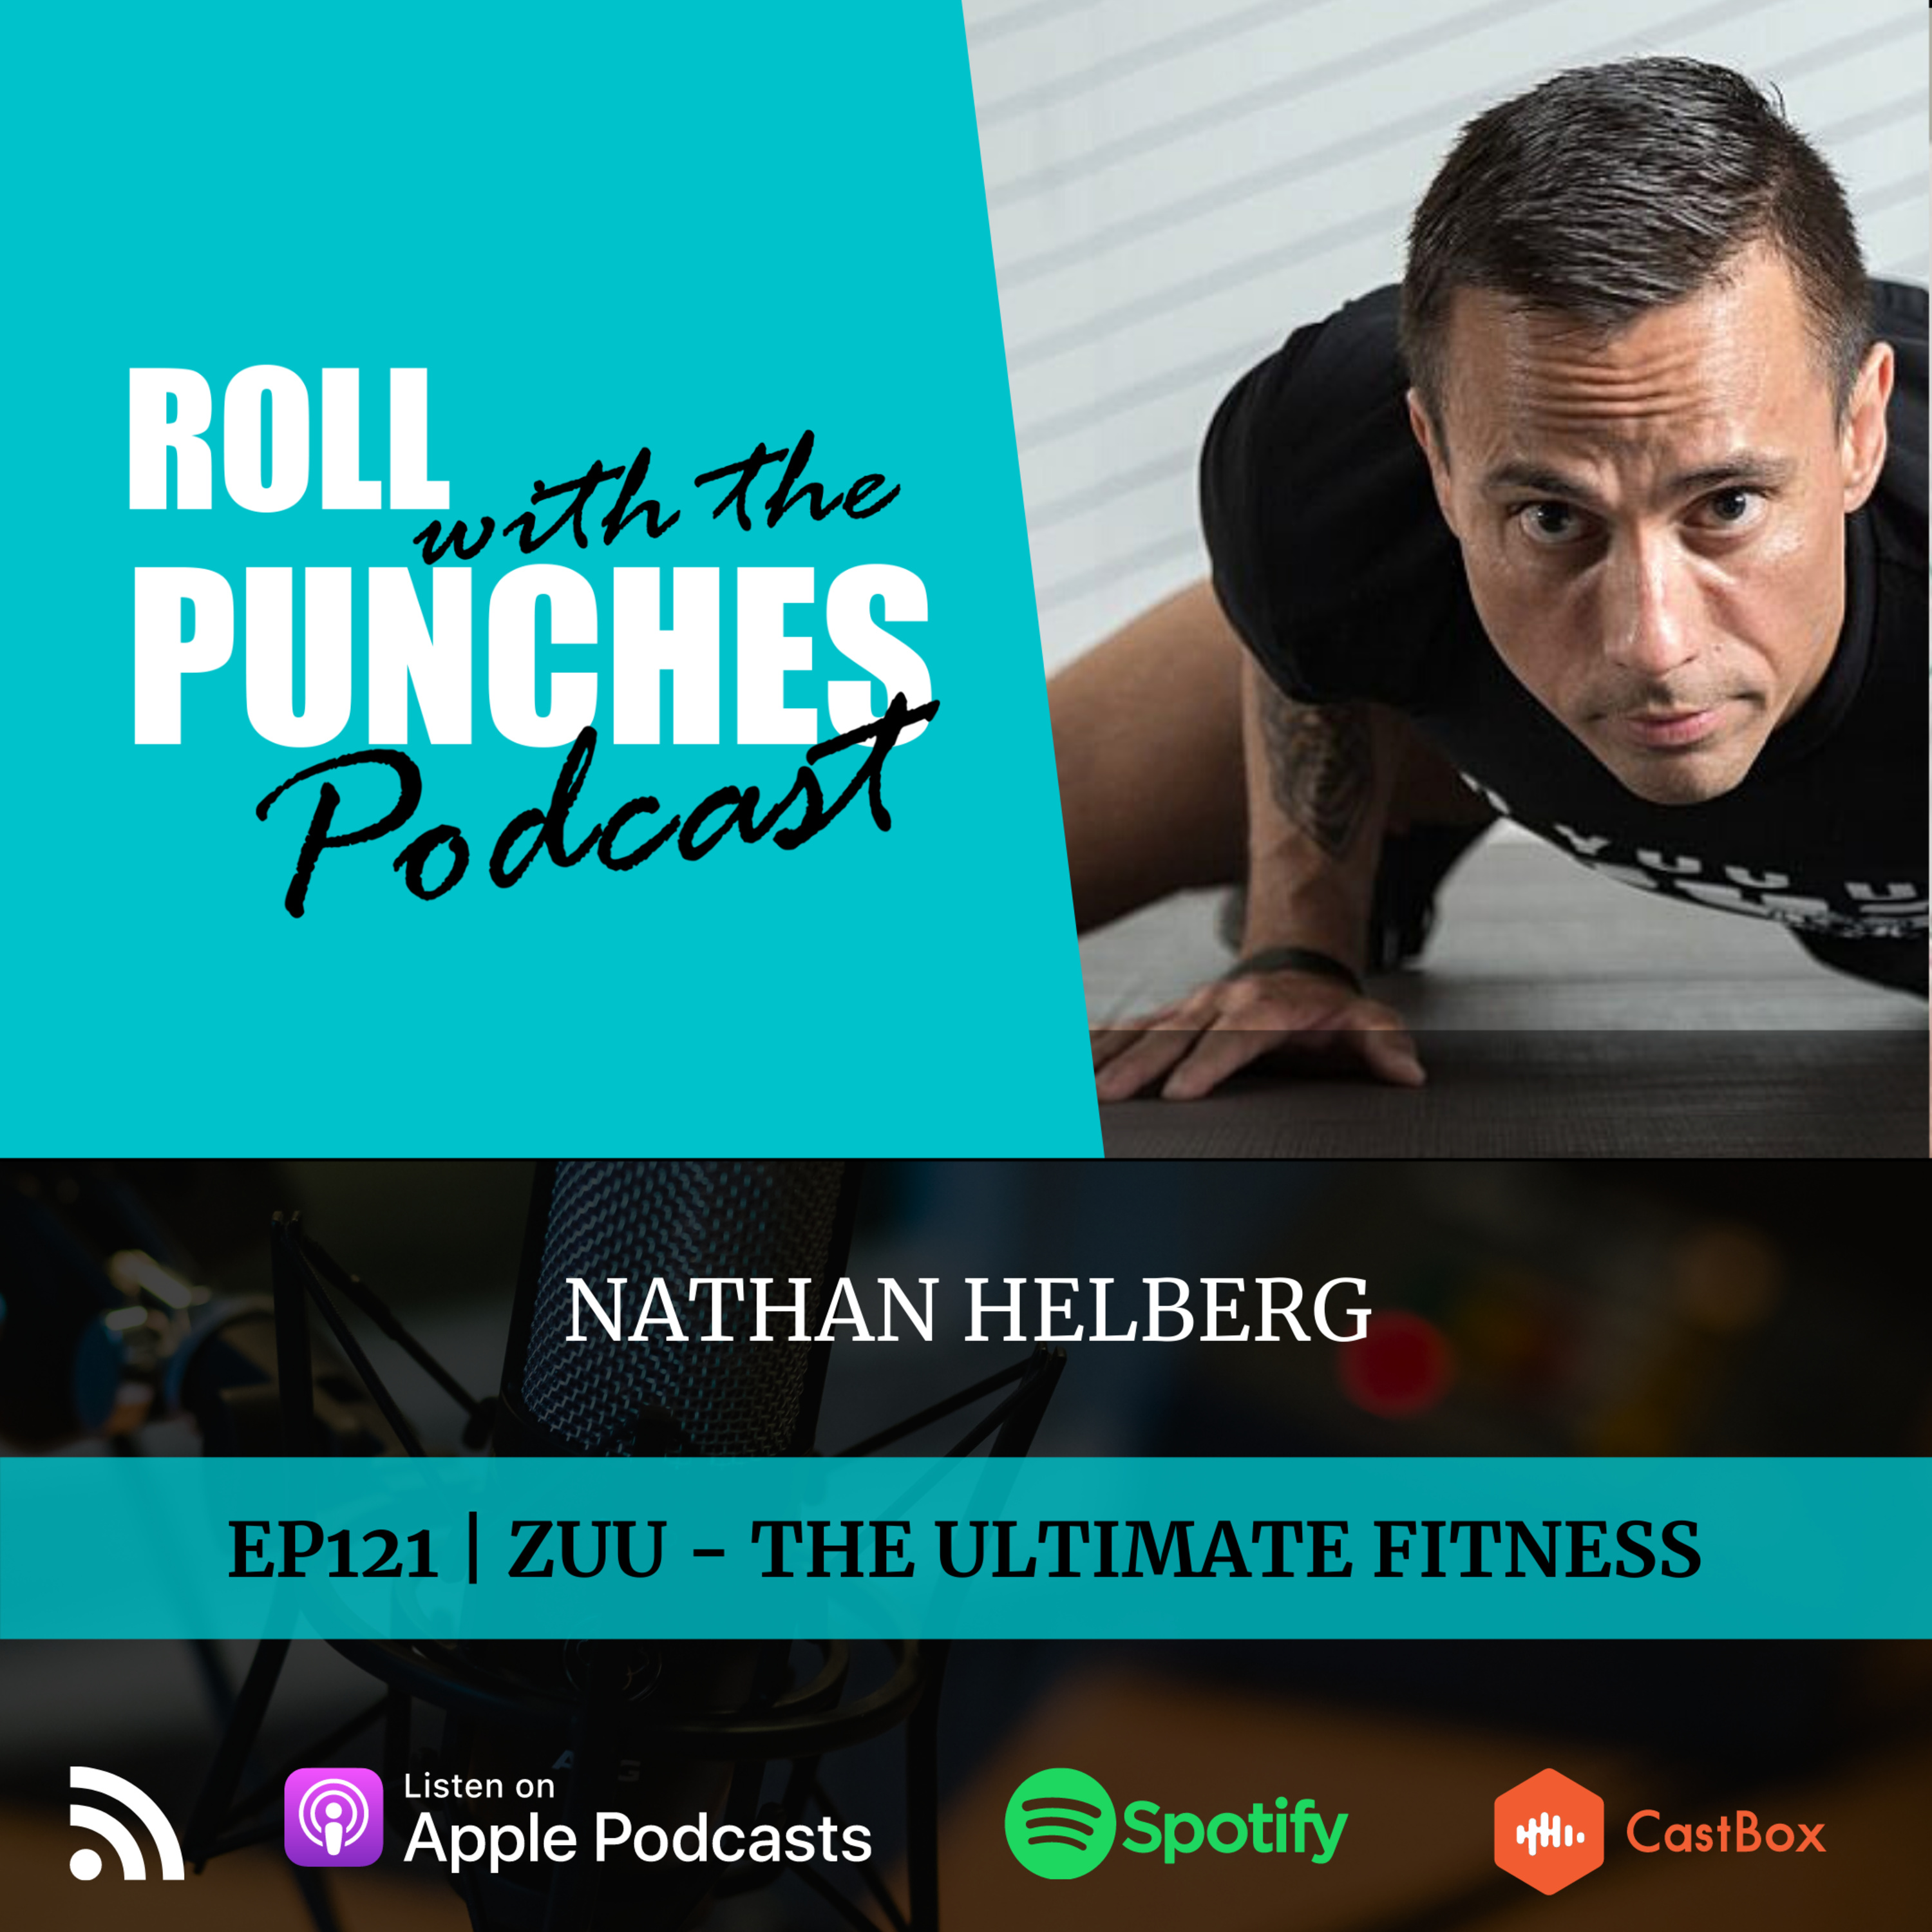 EP121 ZUU - The Ultimate Fitness | Nathan Helberg